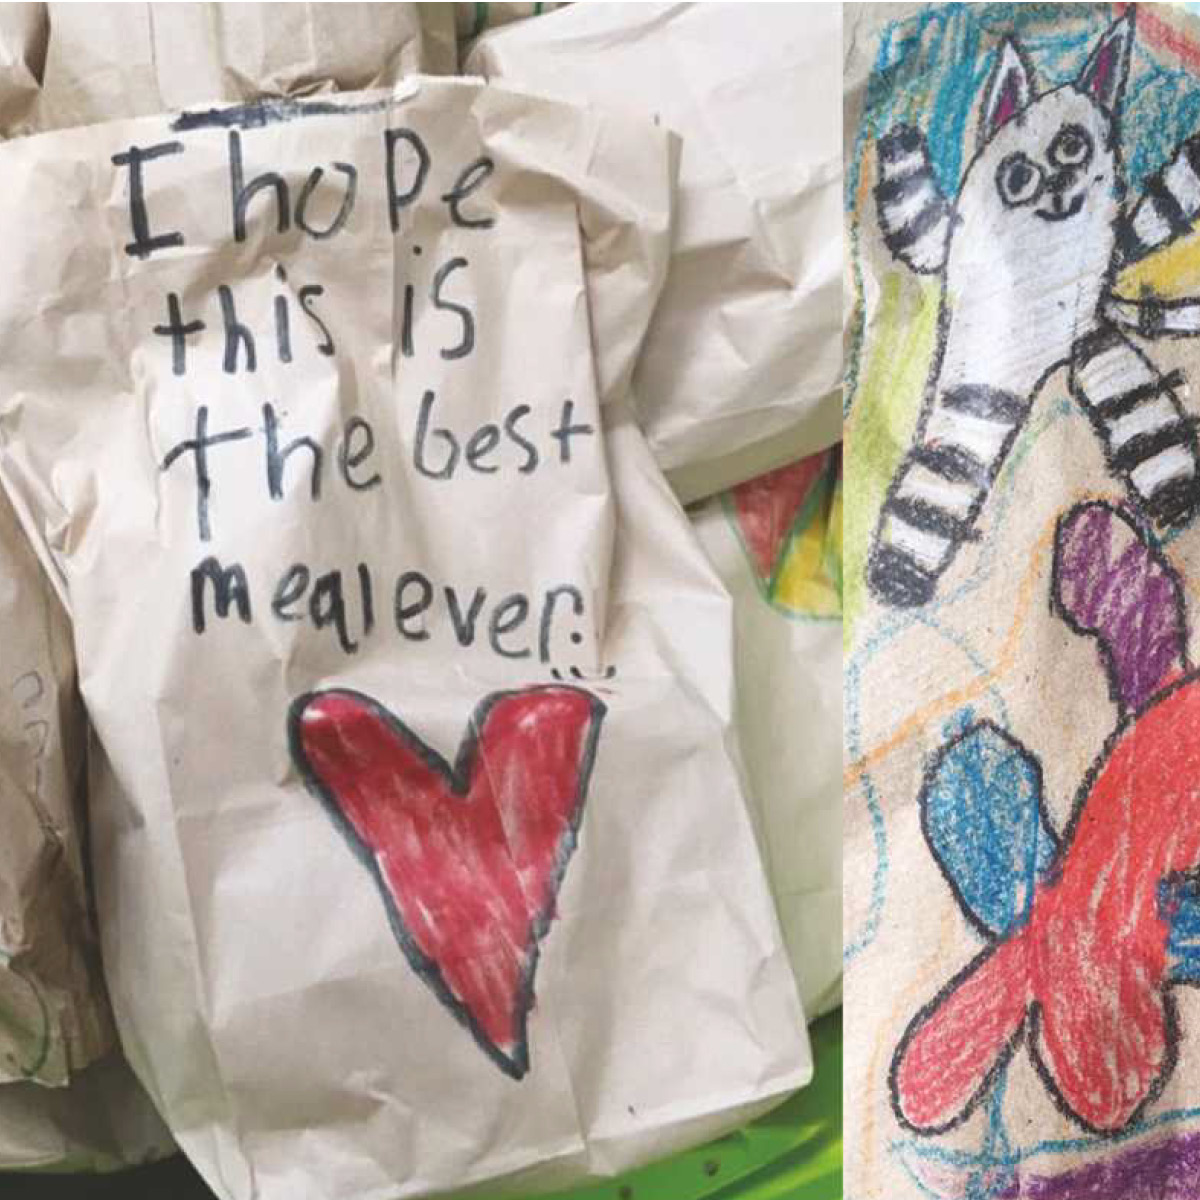 paper bags with crayon drawings made by children. One bag says, "I hope this is the best meal ever".